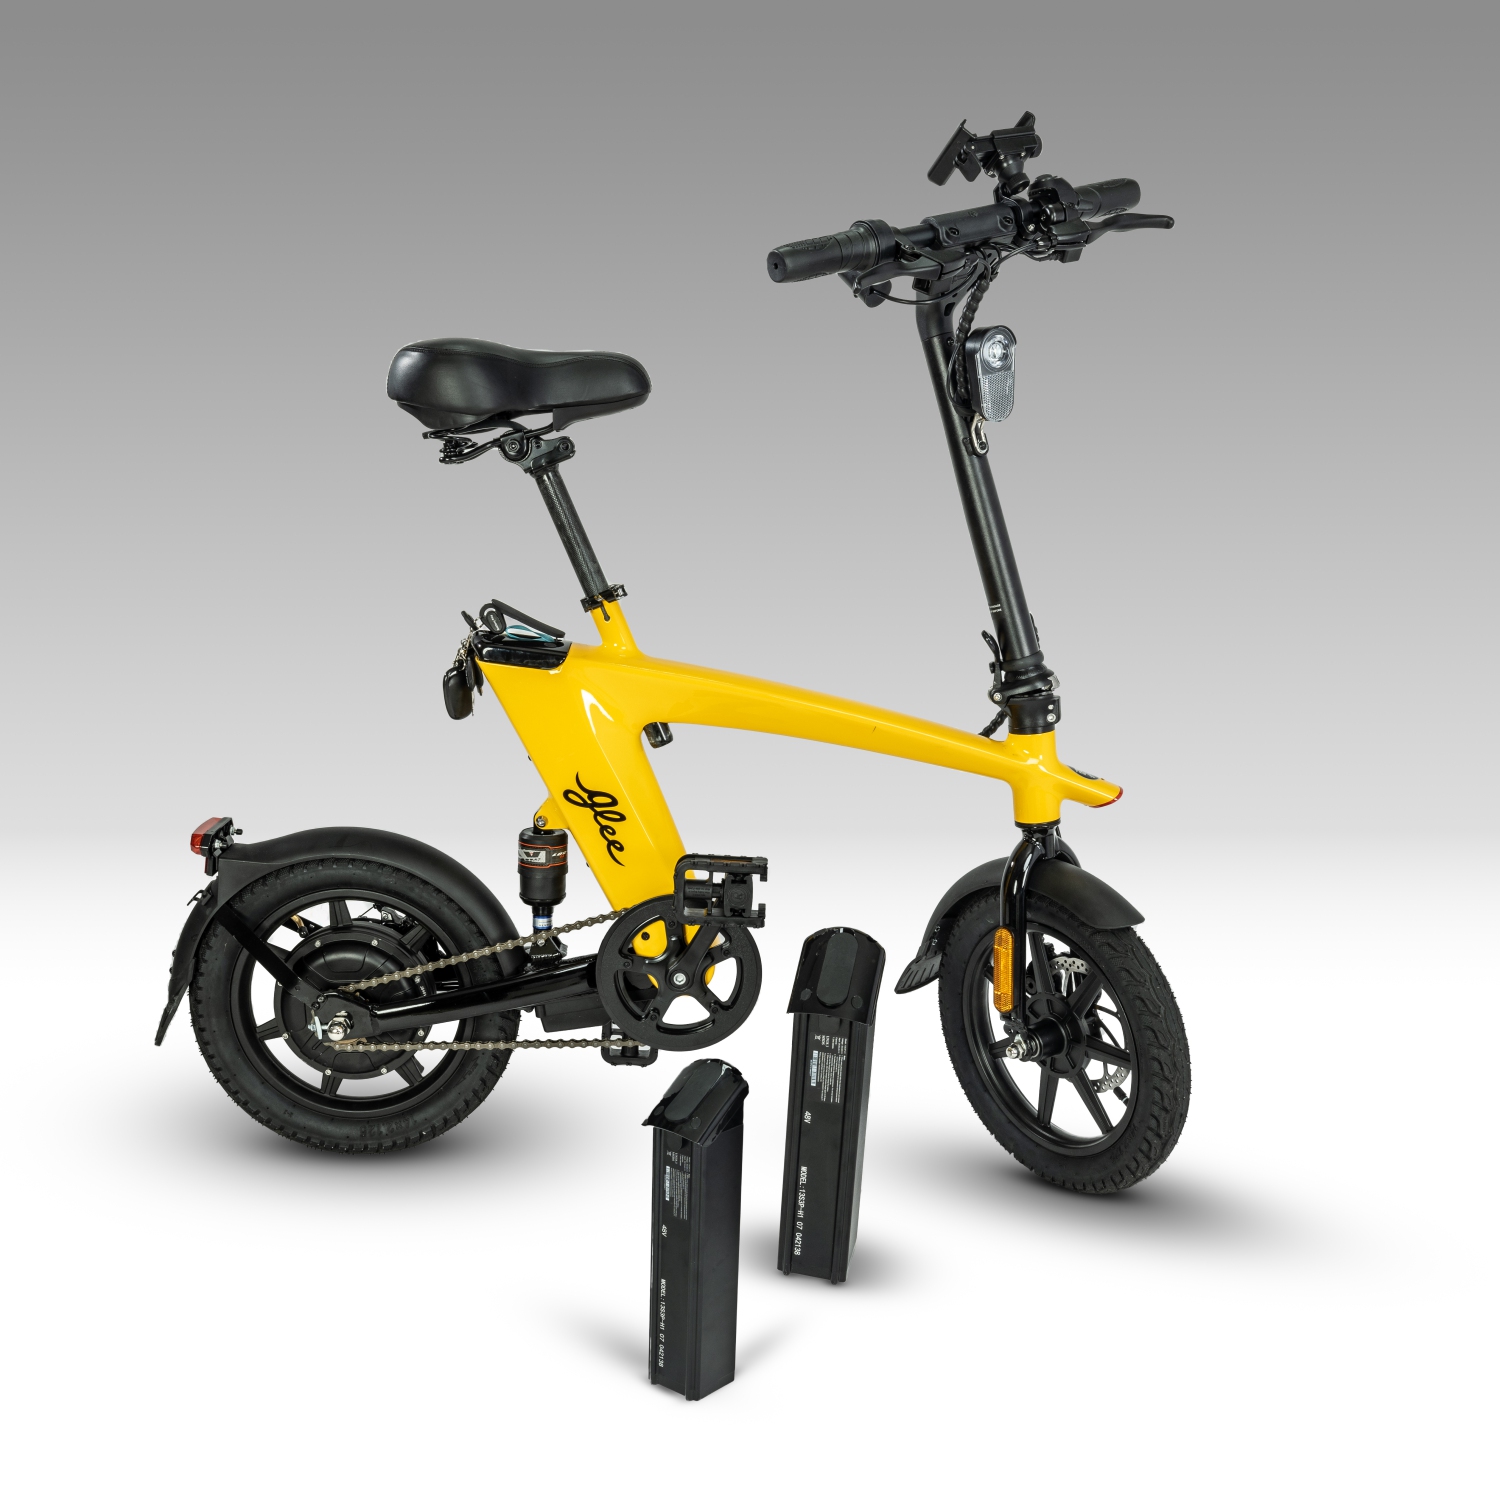 Glee eBikes Super Deal 2 x 48v 7.5ah Swappable Batteries 75km = 150 km /400w/32kmh Top Speed/3 Cycling Modes/+ Electronic In-frame Anti Theft / Electronic Stop and Start Controlled by FOB's (Yellow)